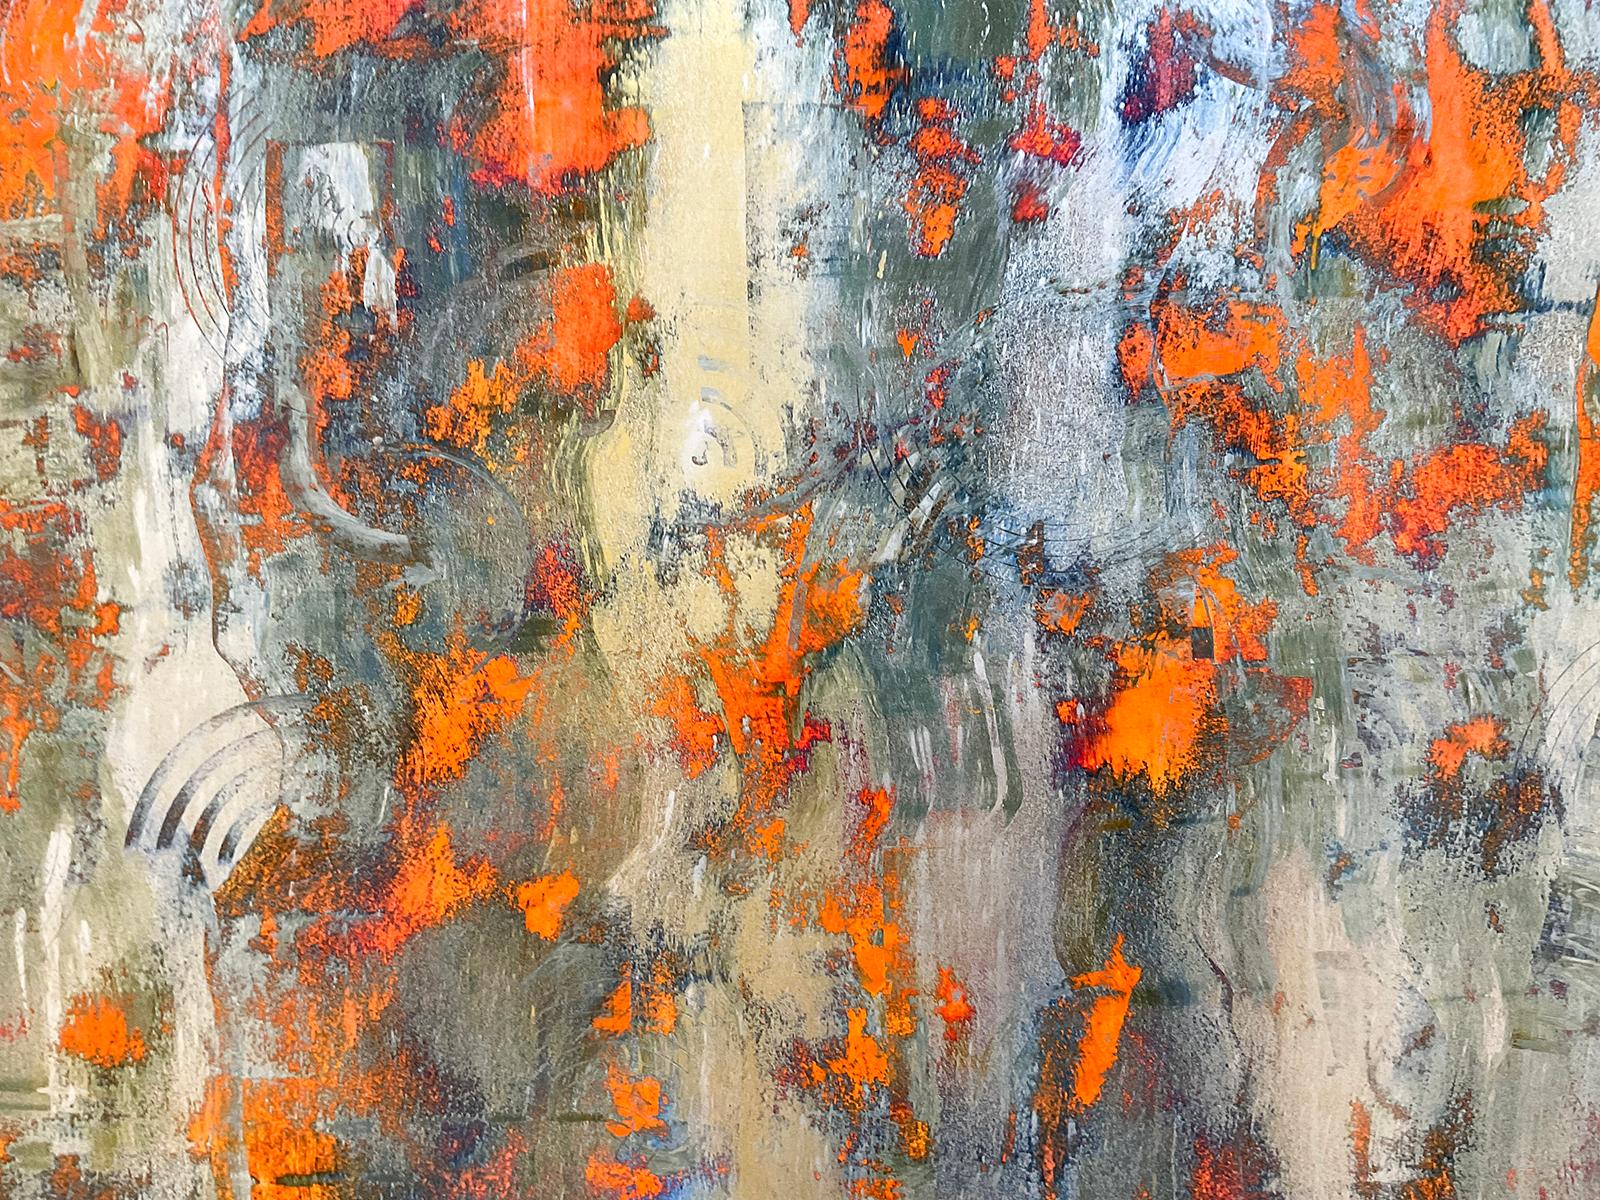 Untitled Orange Silver and Gold: Abstract Expressionist Painting - Brown Abstract Painting by Bruce Murphy